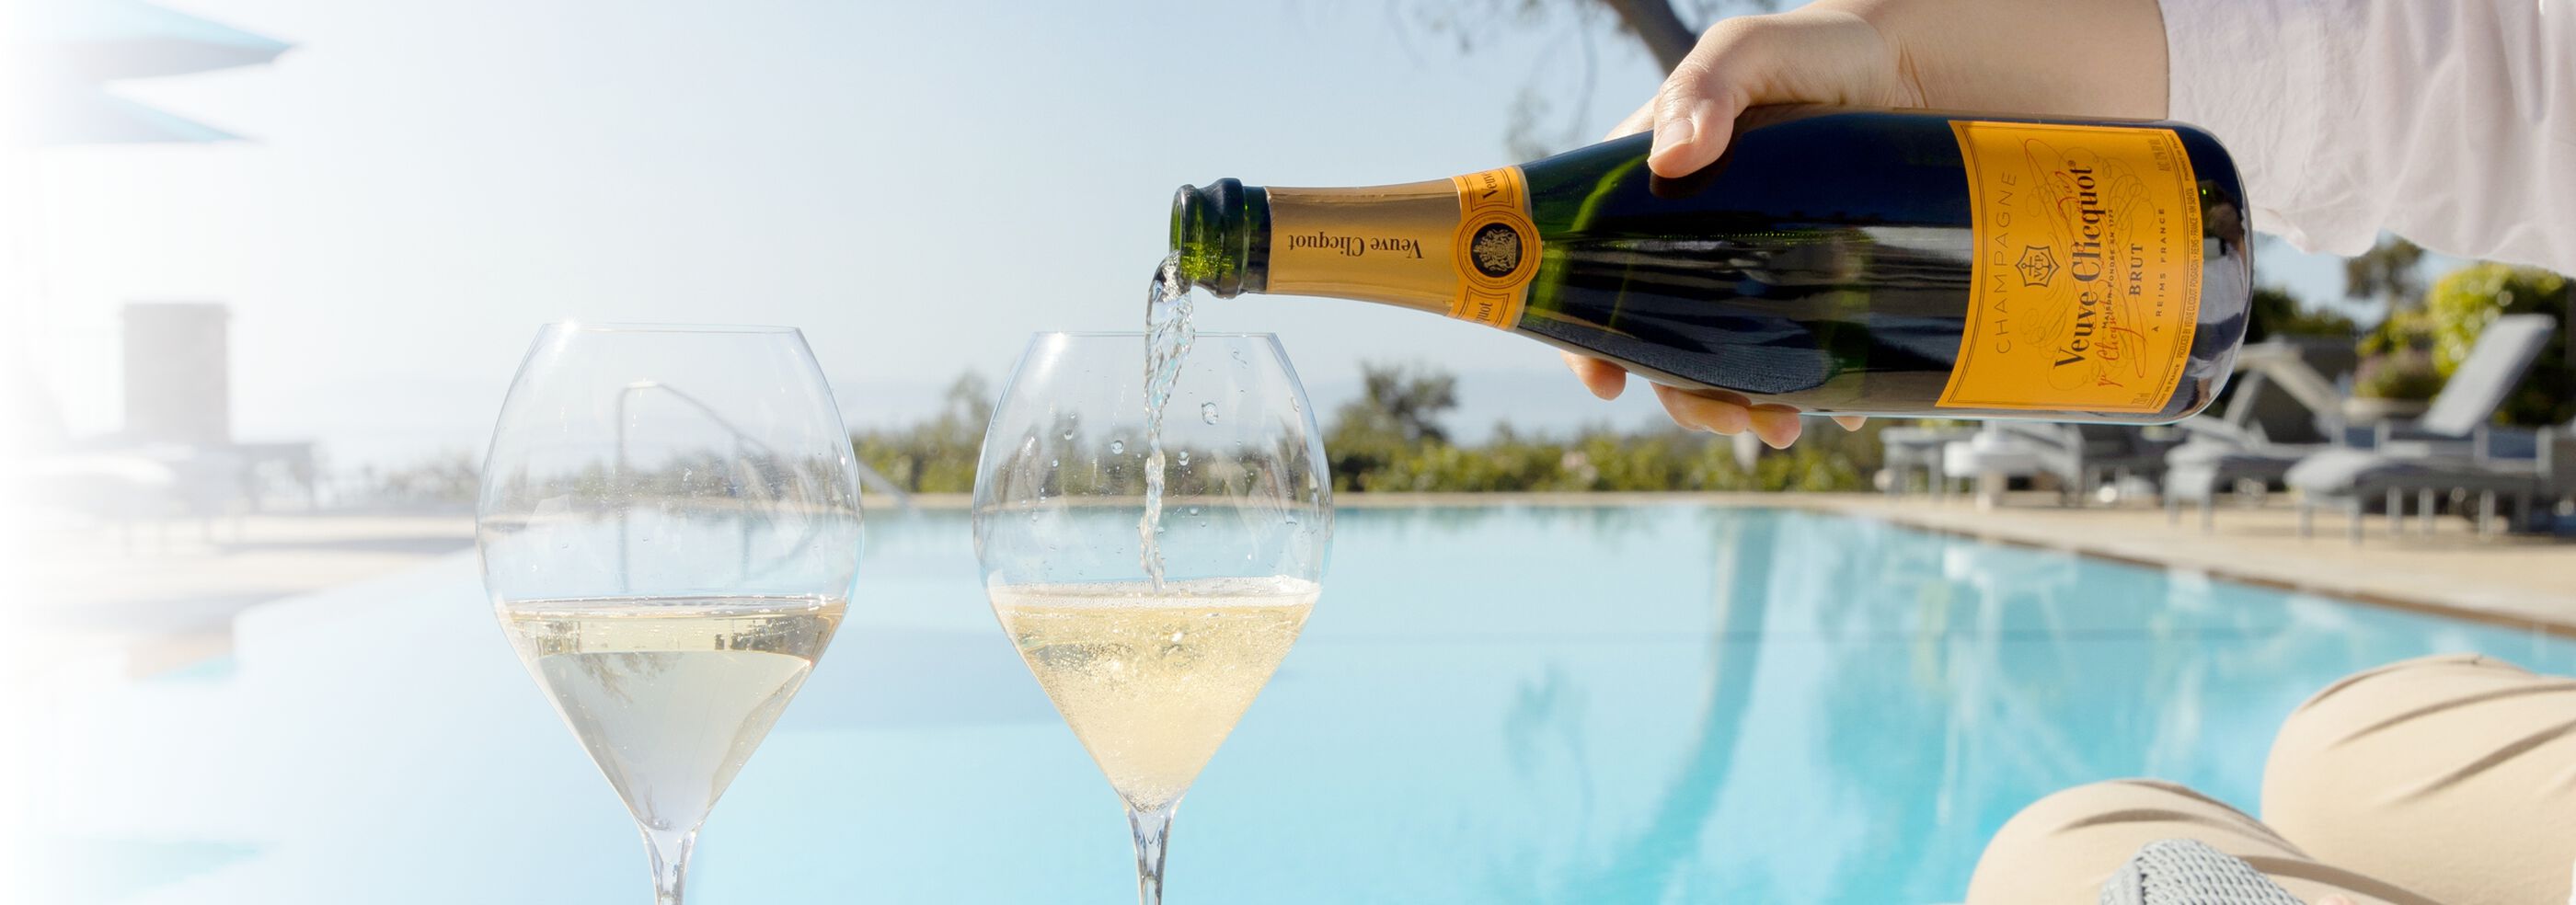 A bottle of Veuve Clicquot being poured into flute glasses poolside